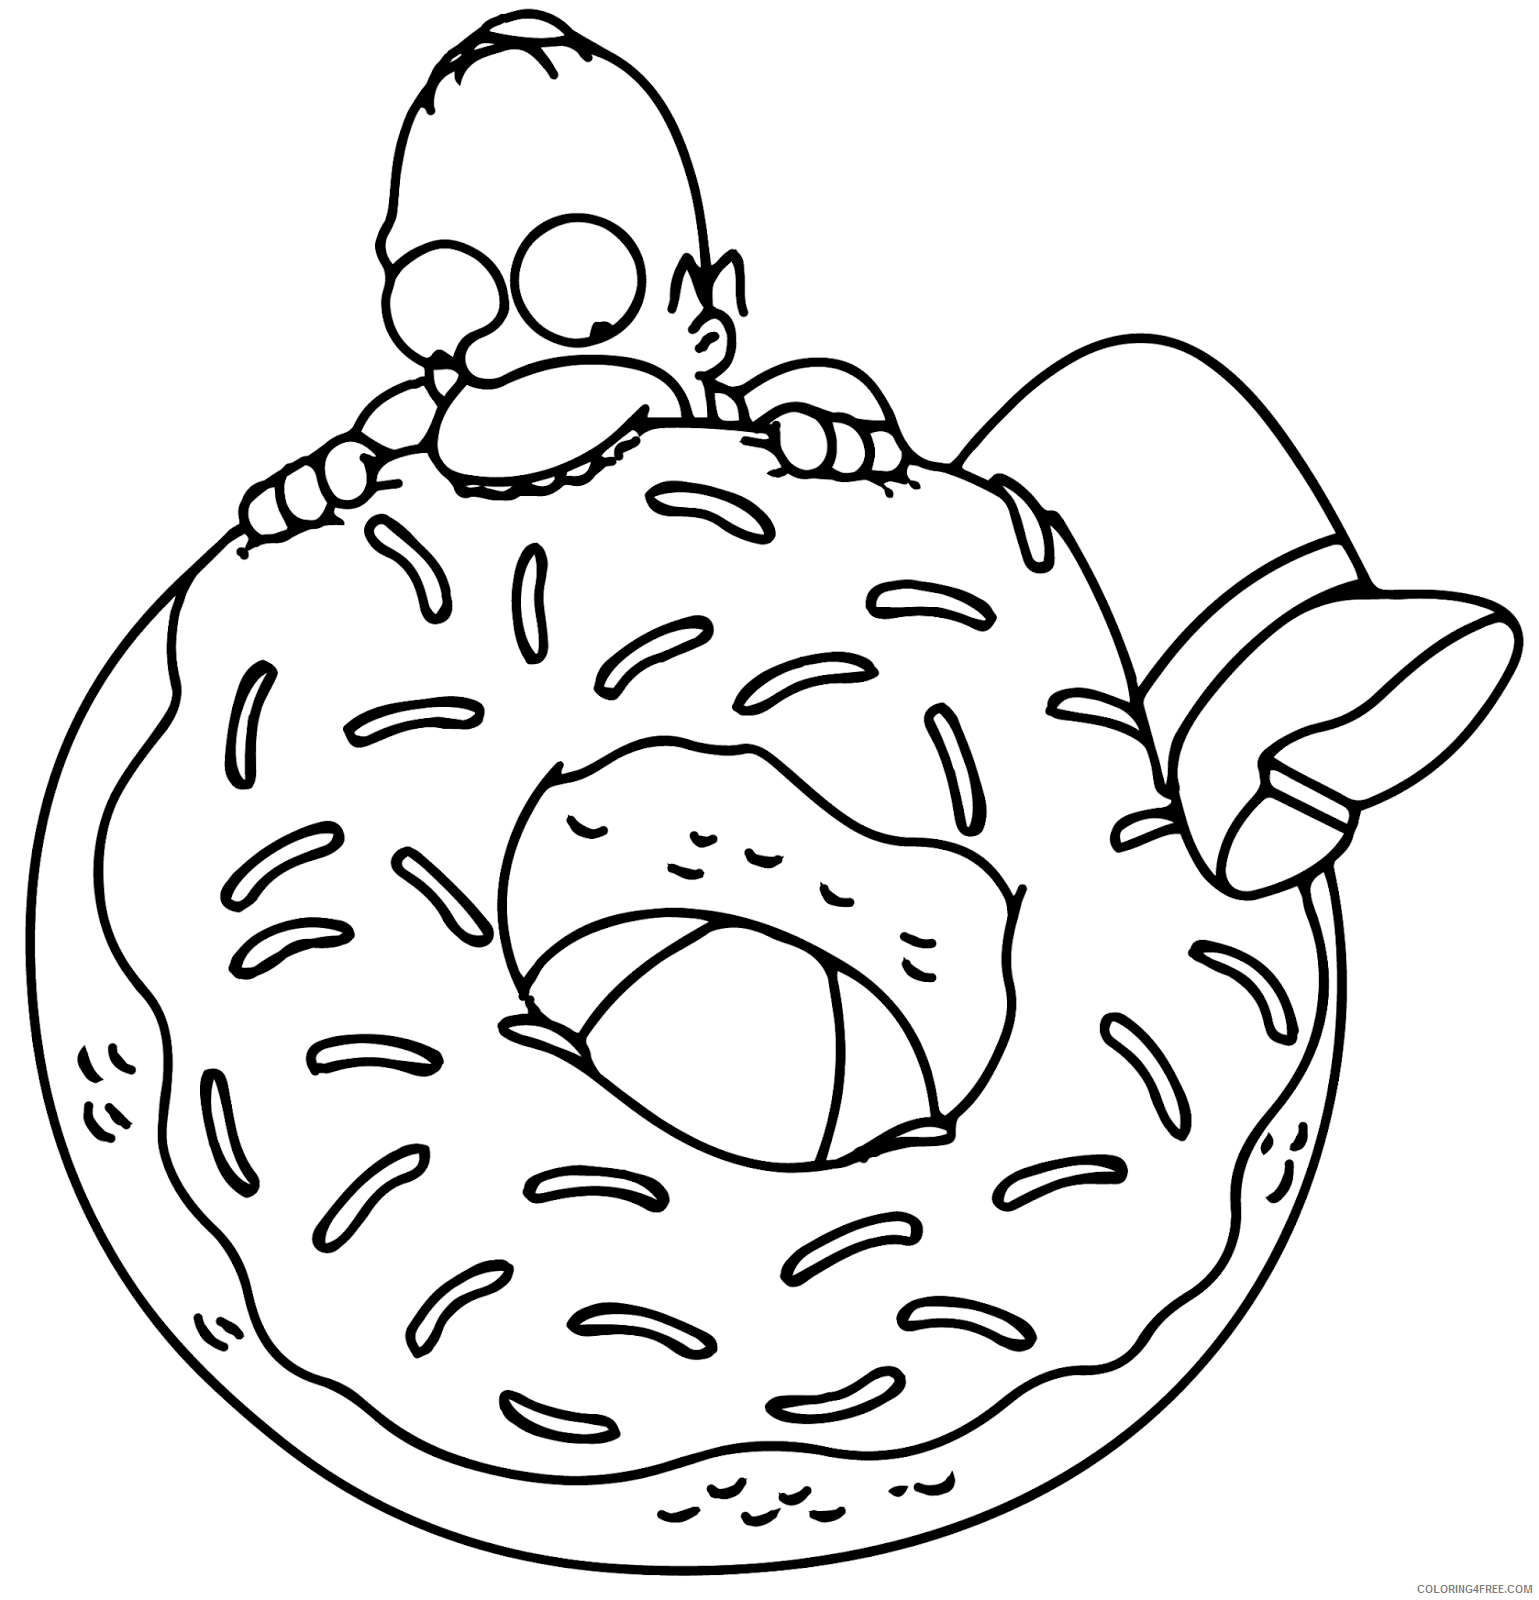 The Simpsons Coloring Pages TV Film The Simpsons for Kids Printable 2020 09638 Coloring4free